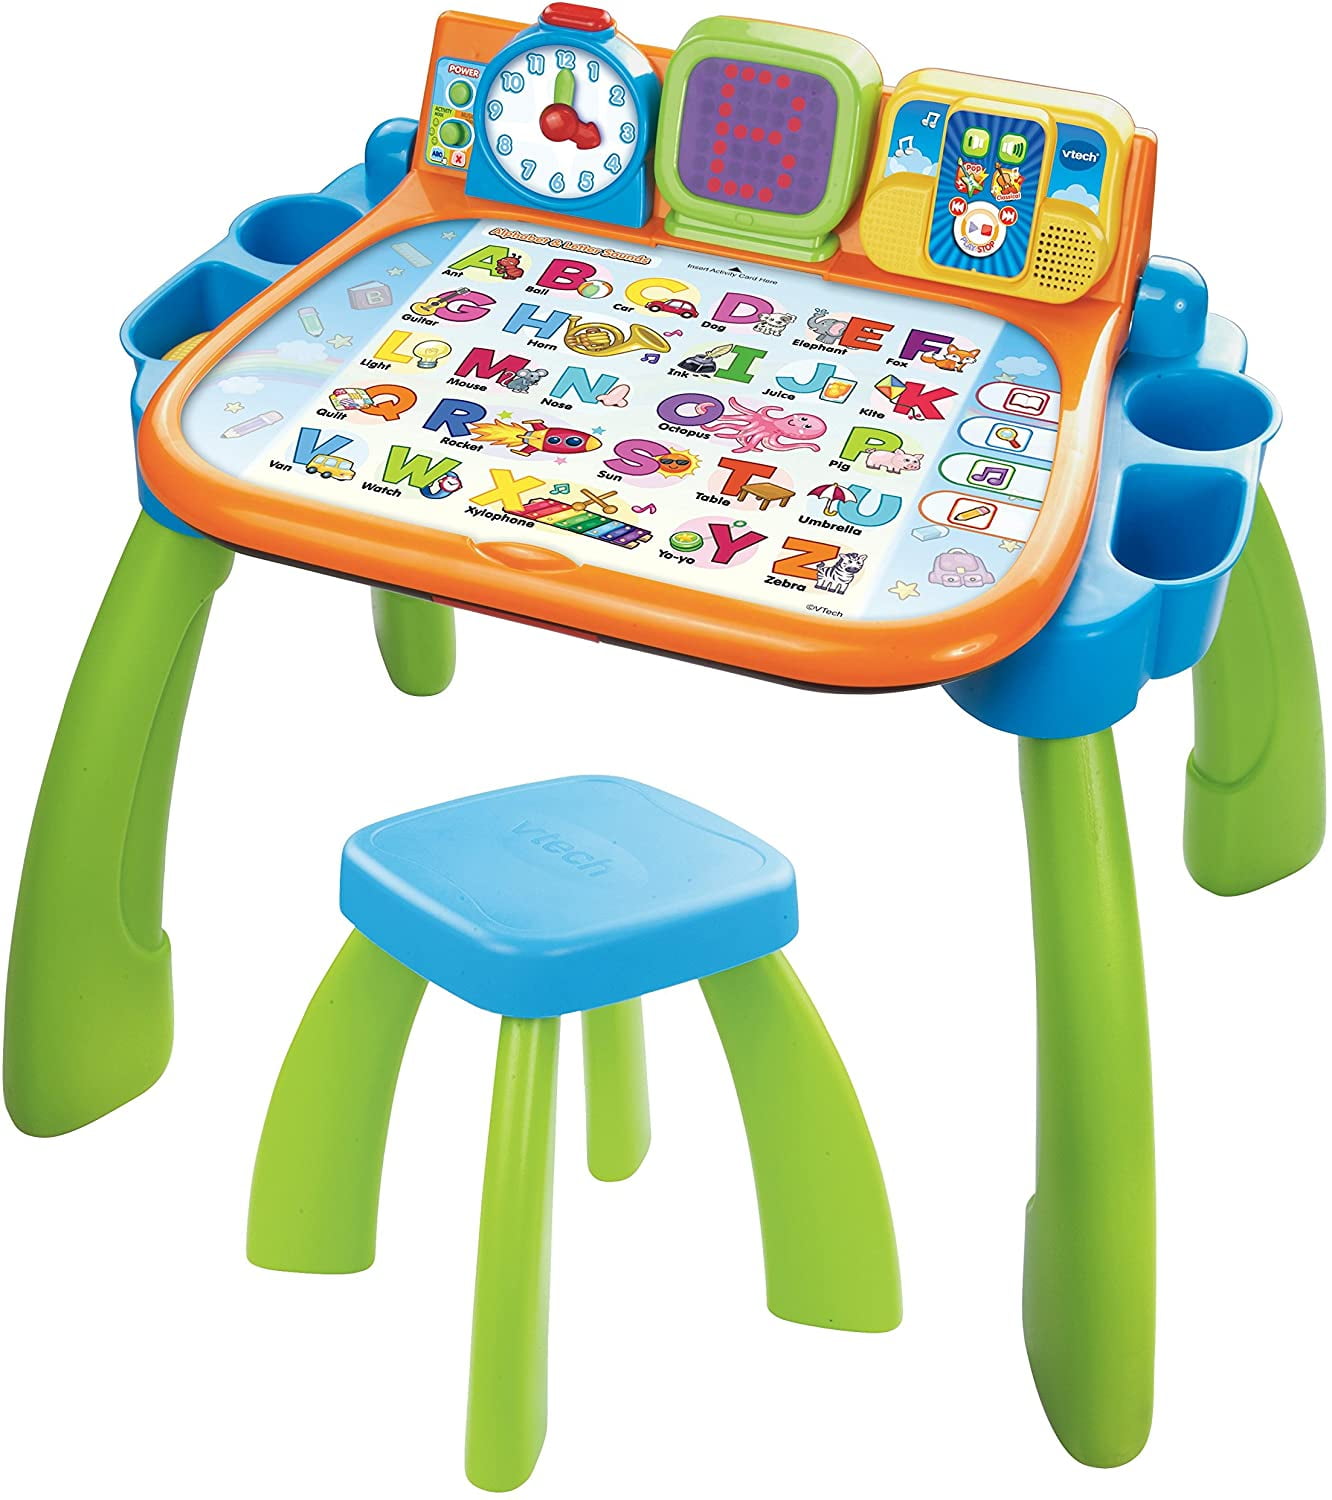 VTech Touch and Learn Activity Desk Deluxe Pink for sale online 